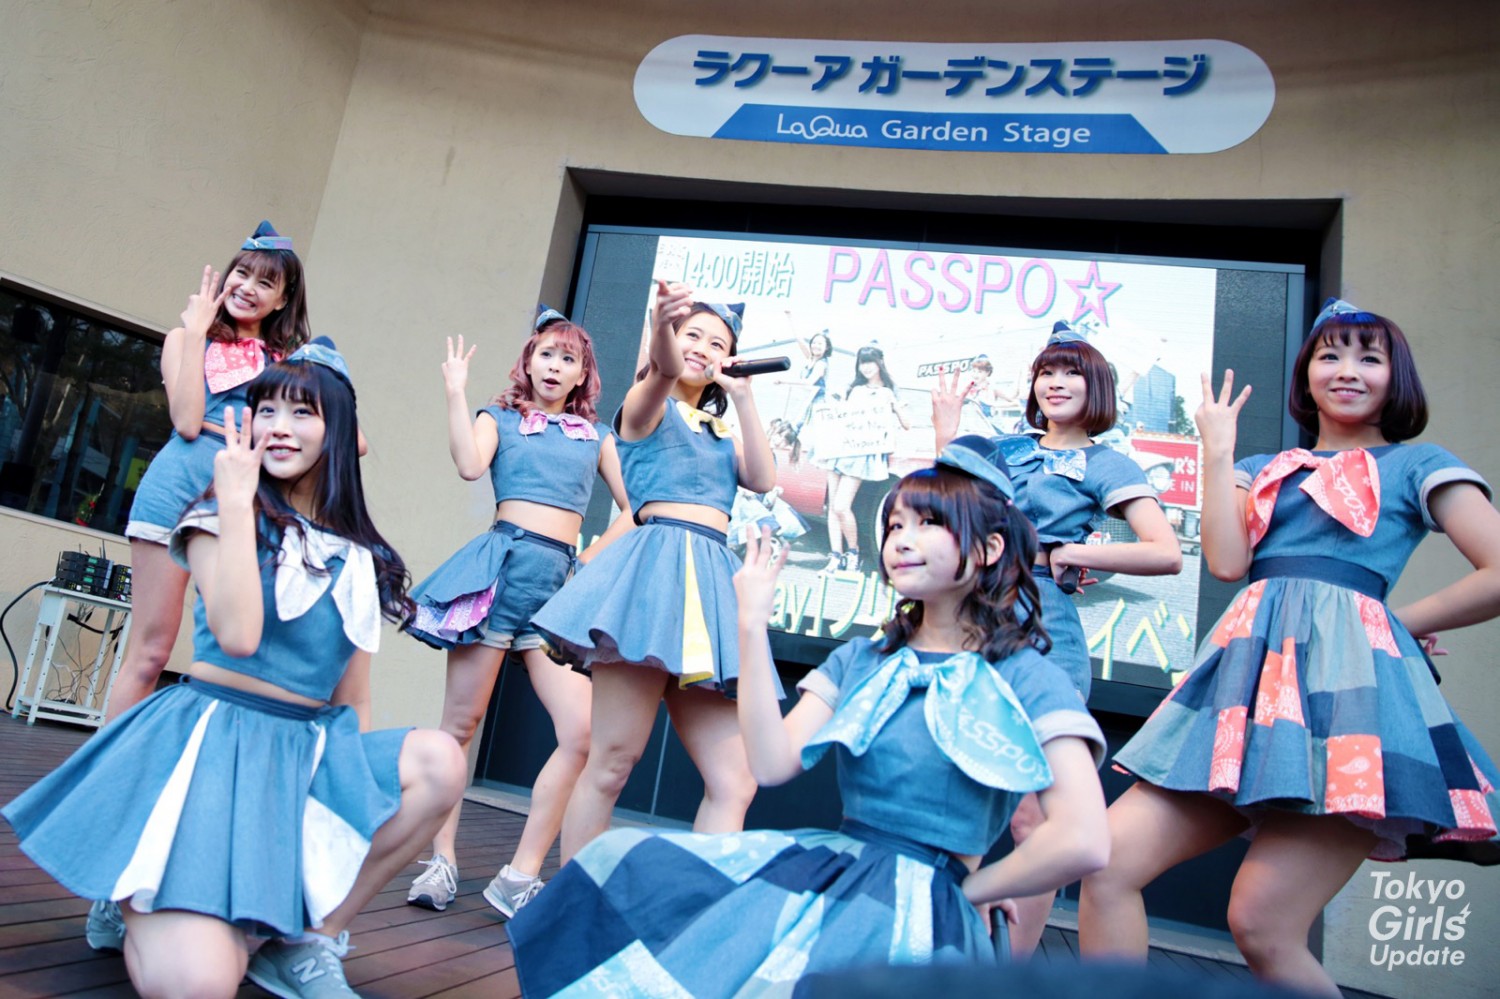 PASSPO☆ Takes Off Again & Shows their Re-debut Single “Mr.Wednesday” Under the Bright Sky!